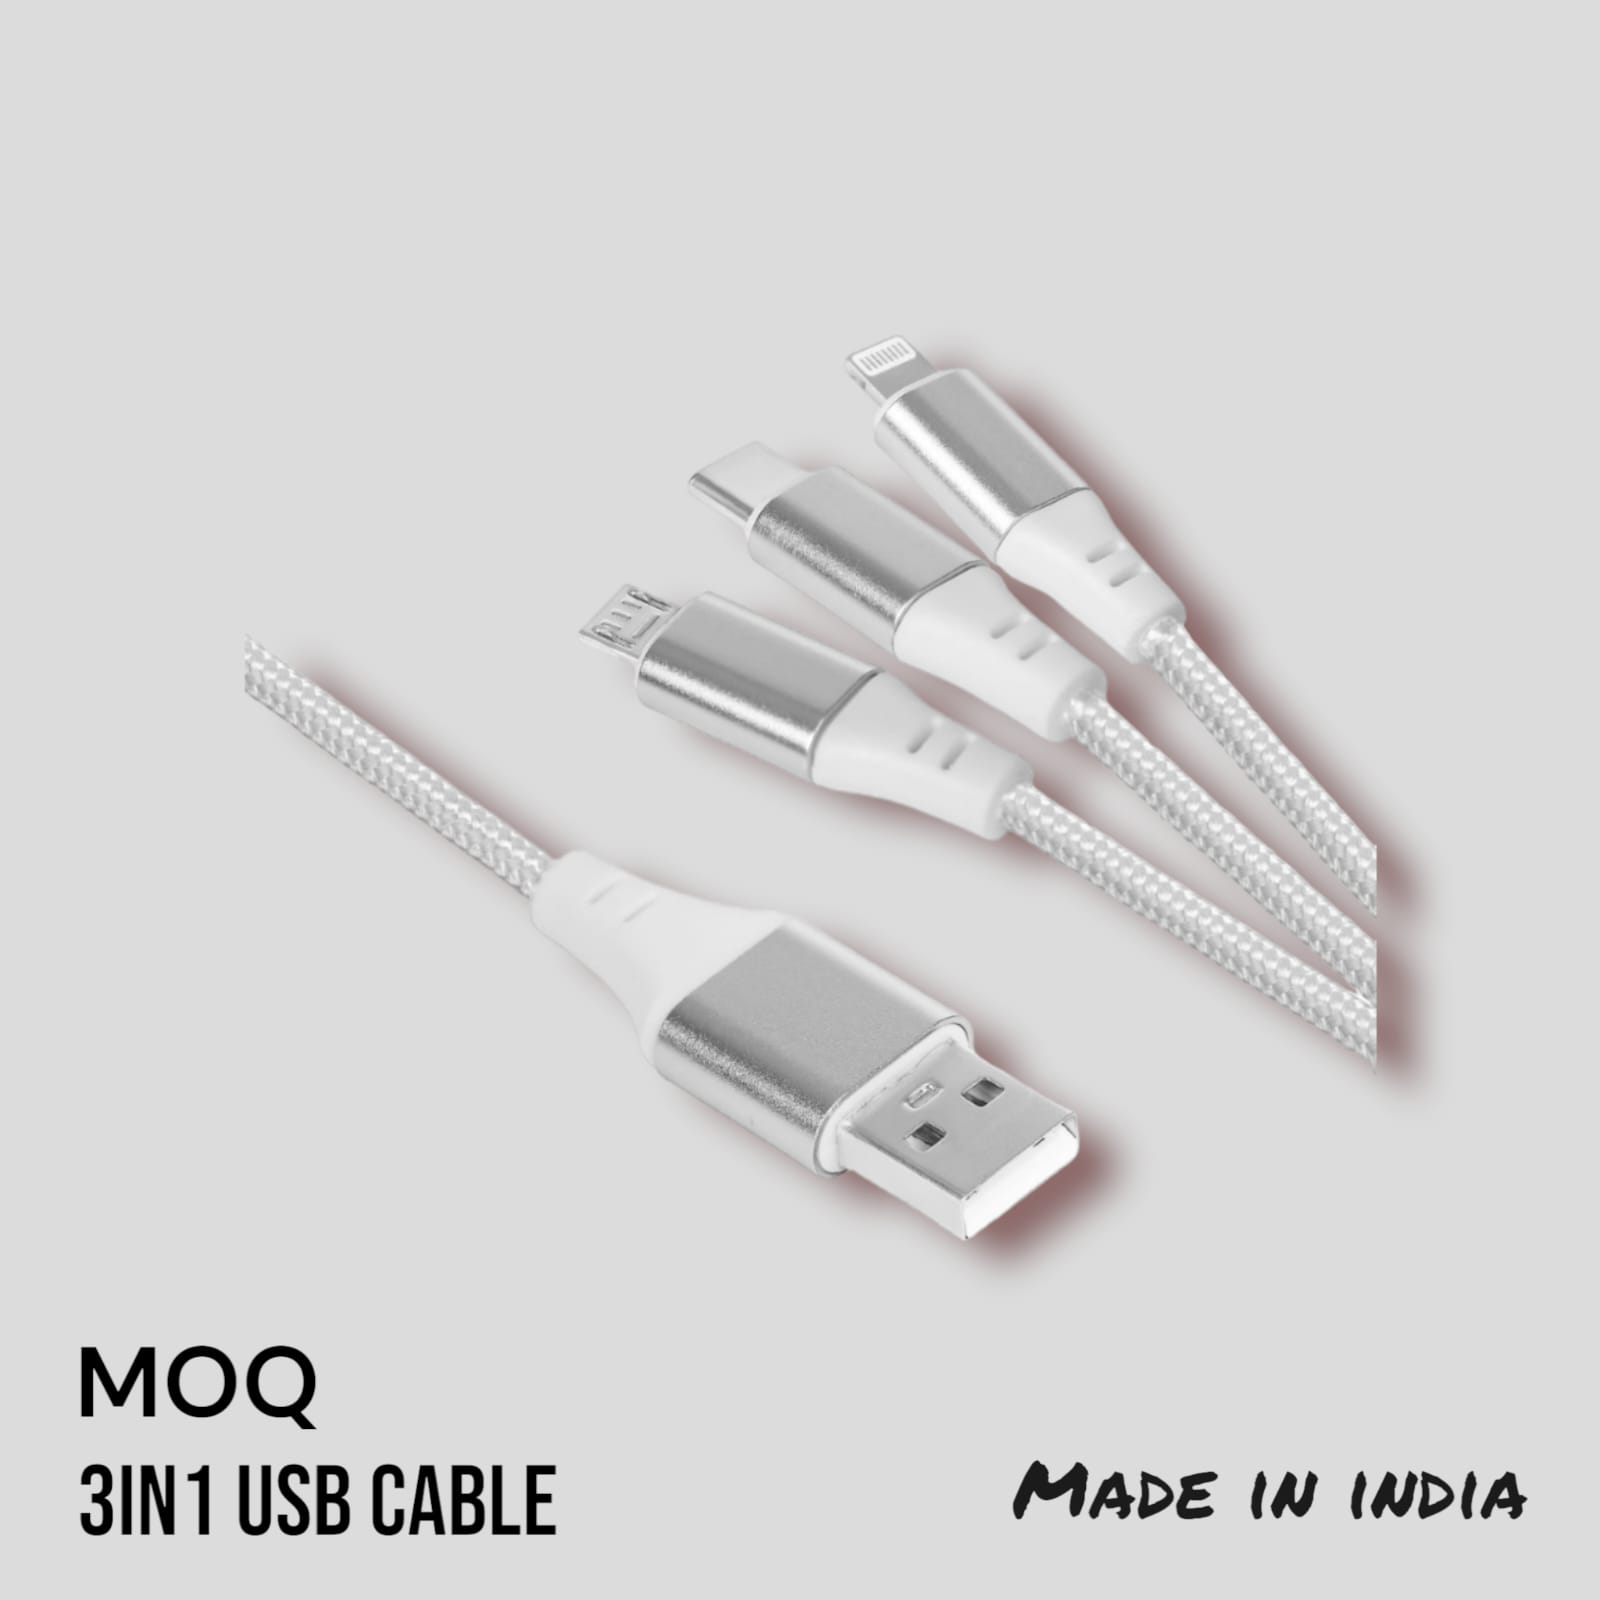 MOBILE CHARGING CABLE FOR MICRO USB , TYPE C AND IPHONE 